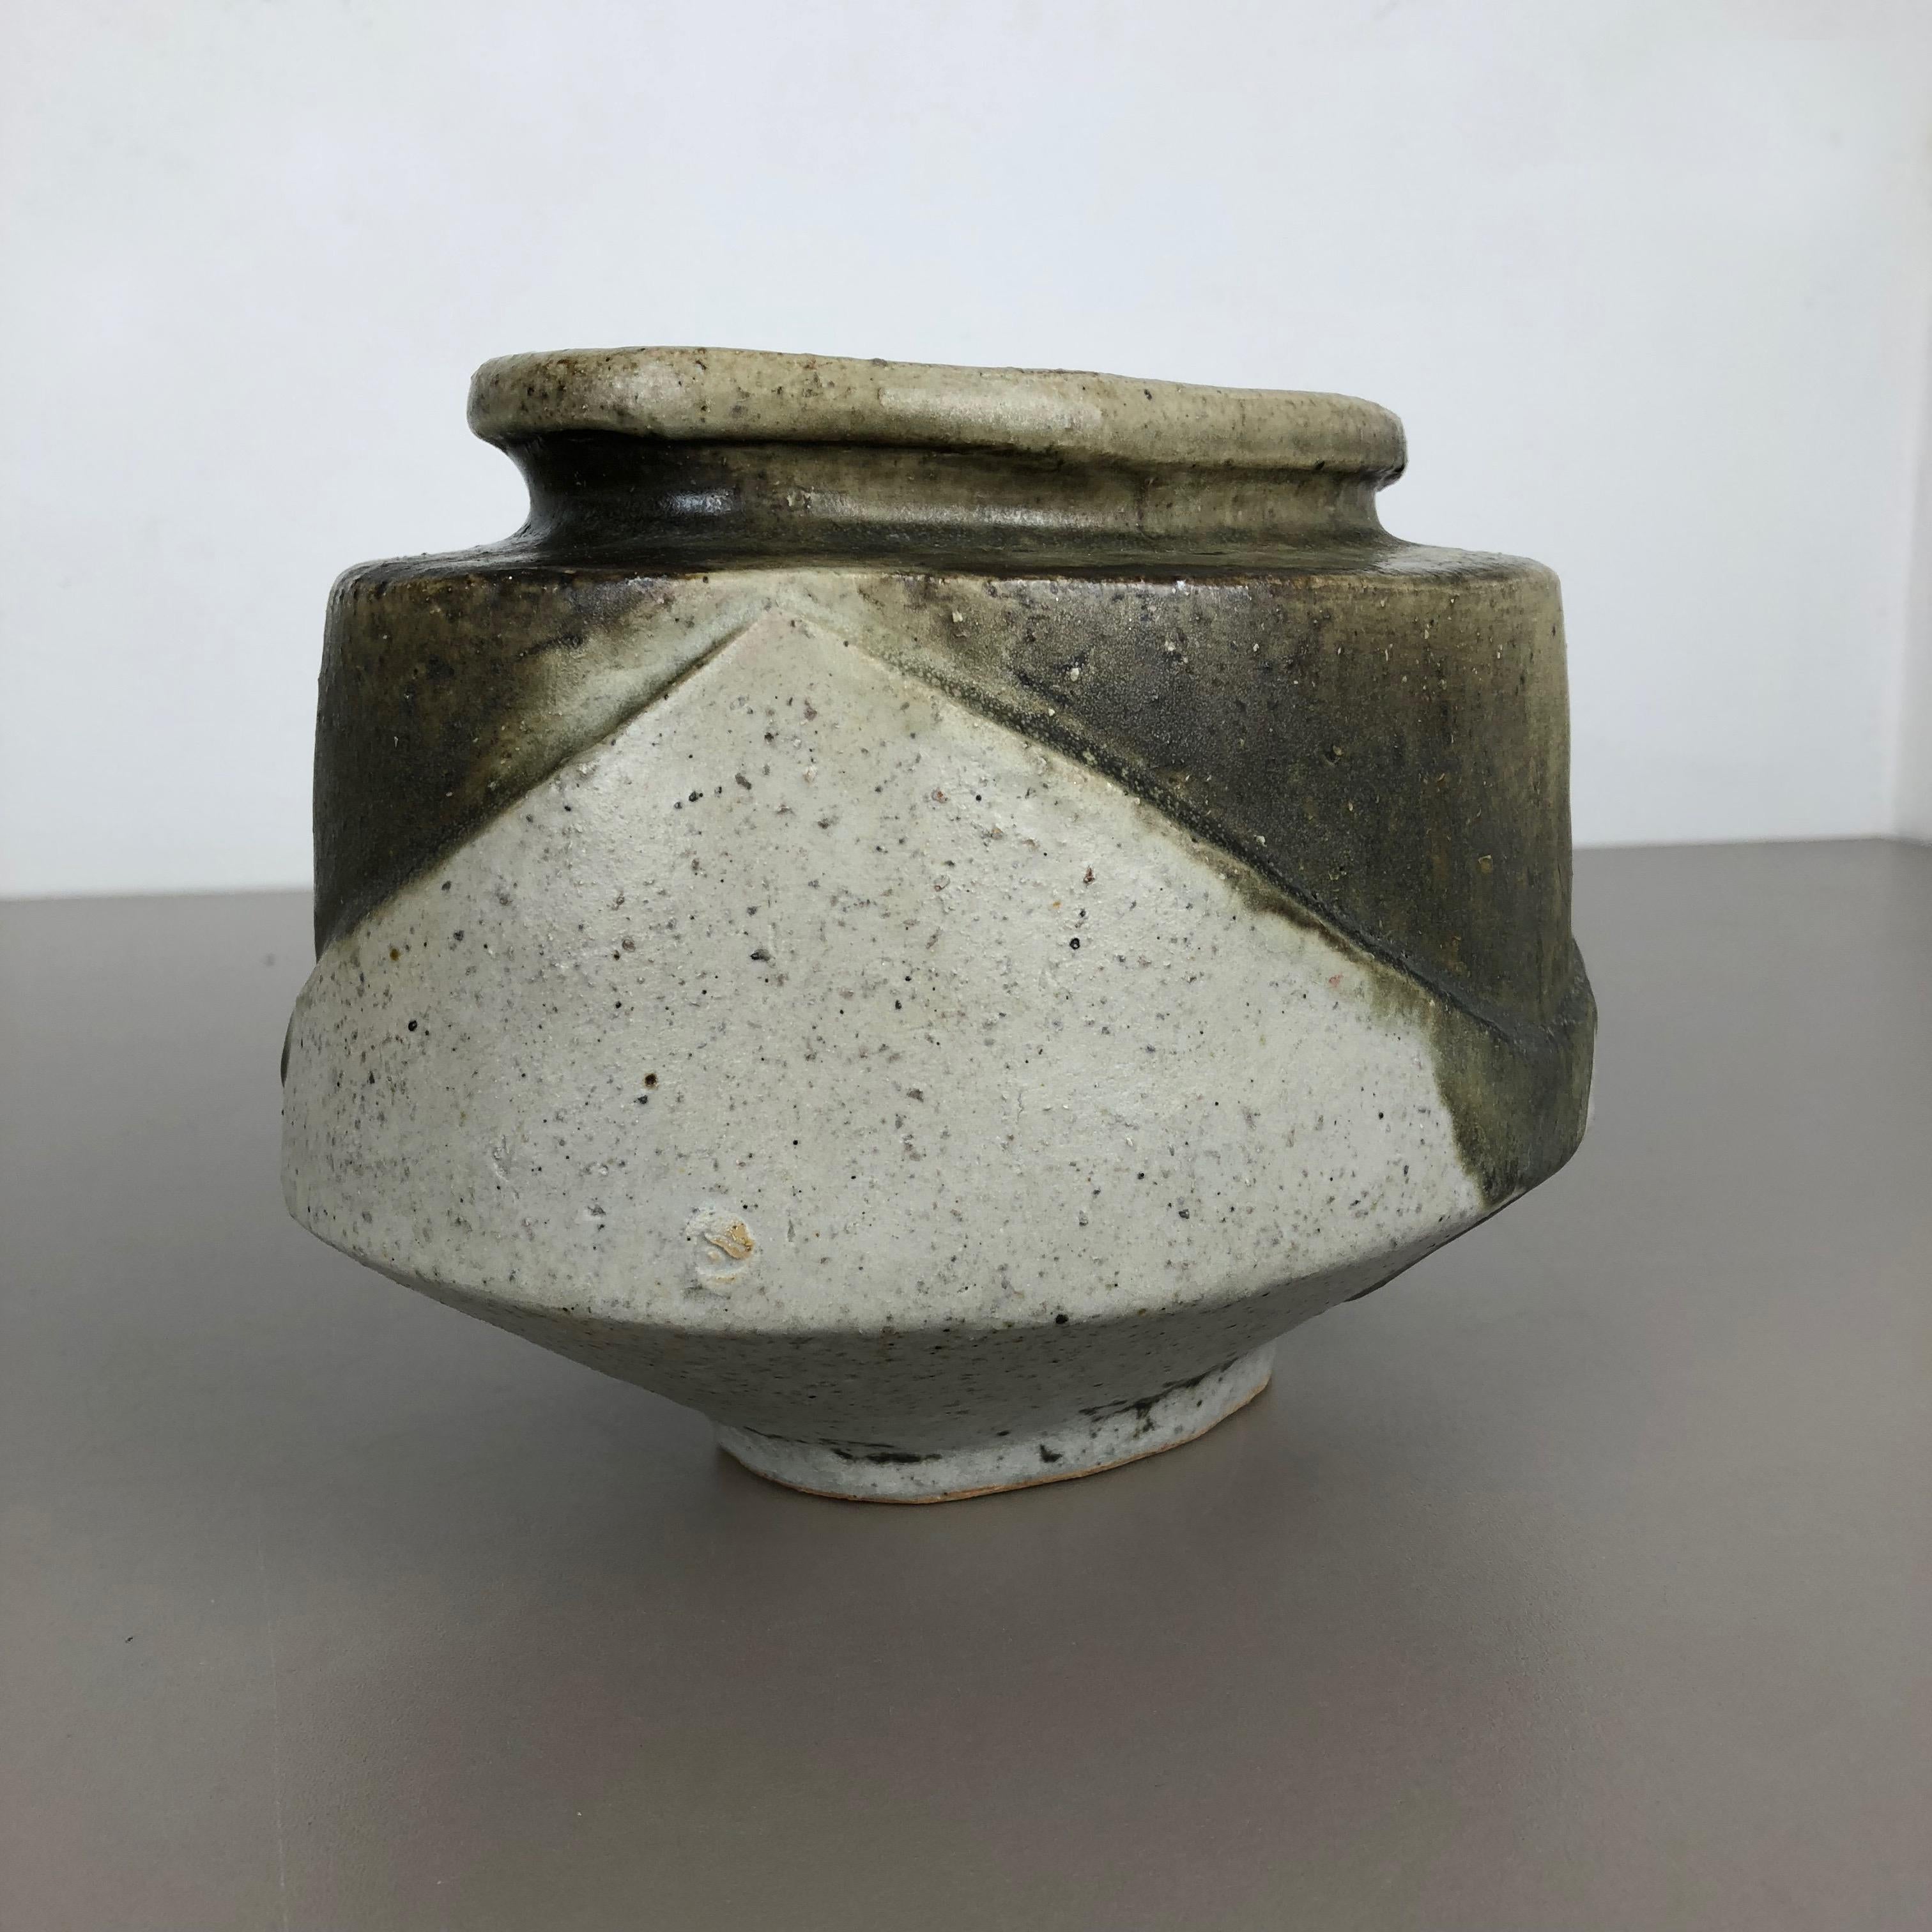 Ceramic Studio Pottery Object Vase by Bruno and Ingeborg Asshoff, Germany, 1960s For Sale 1